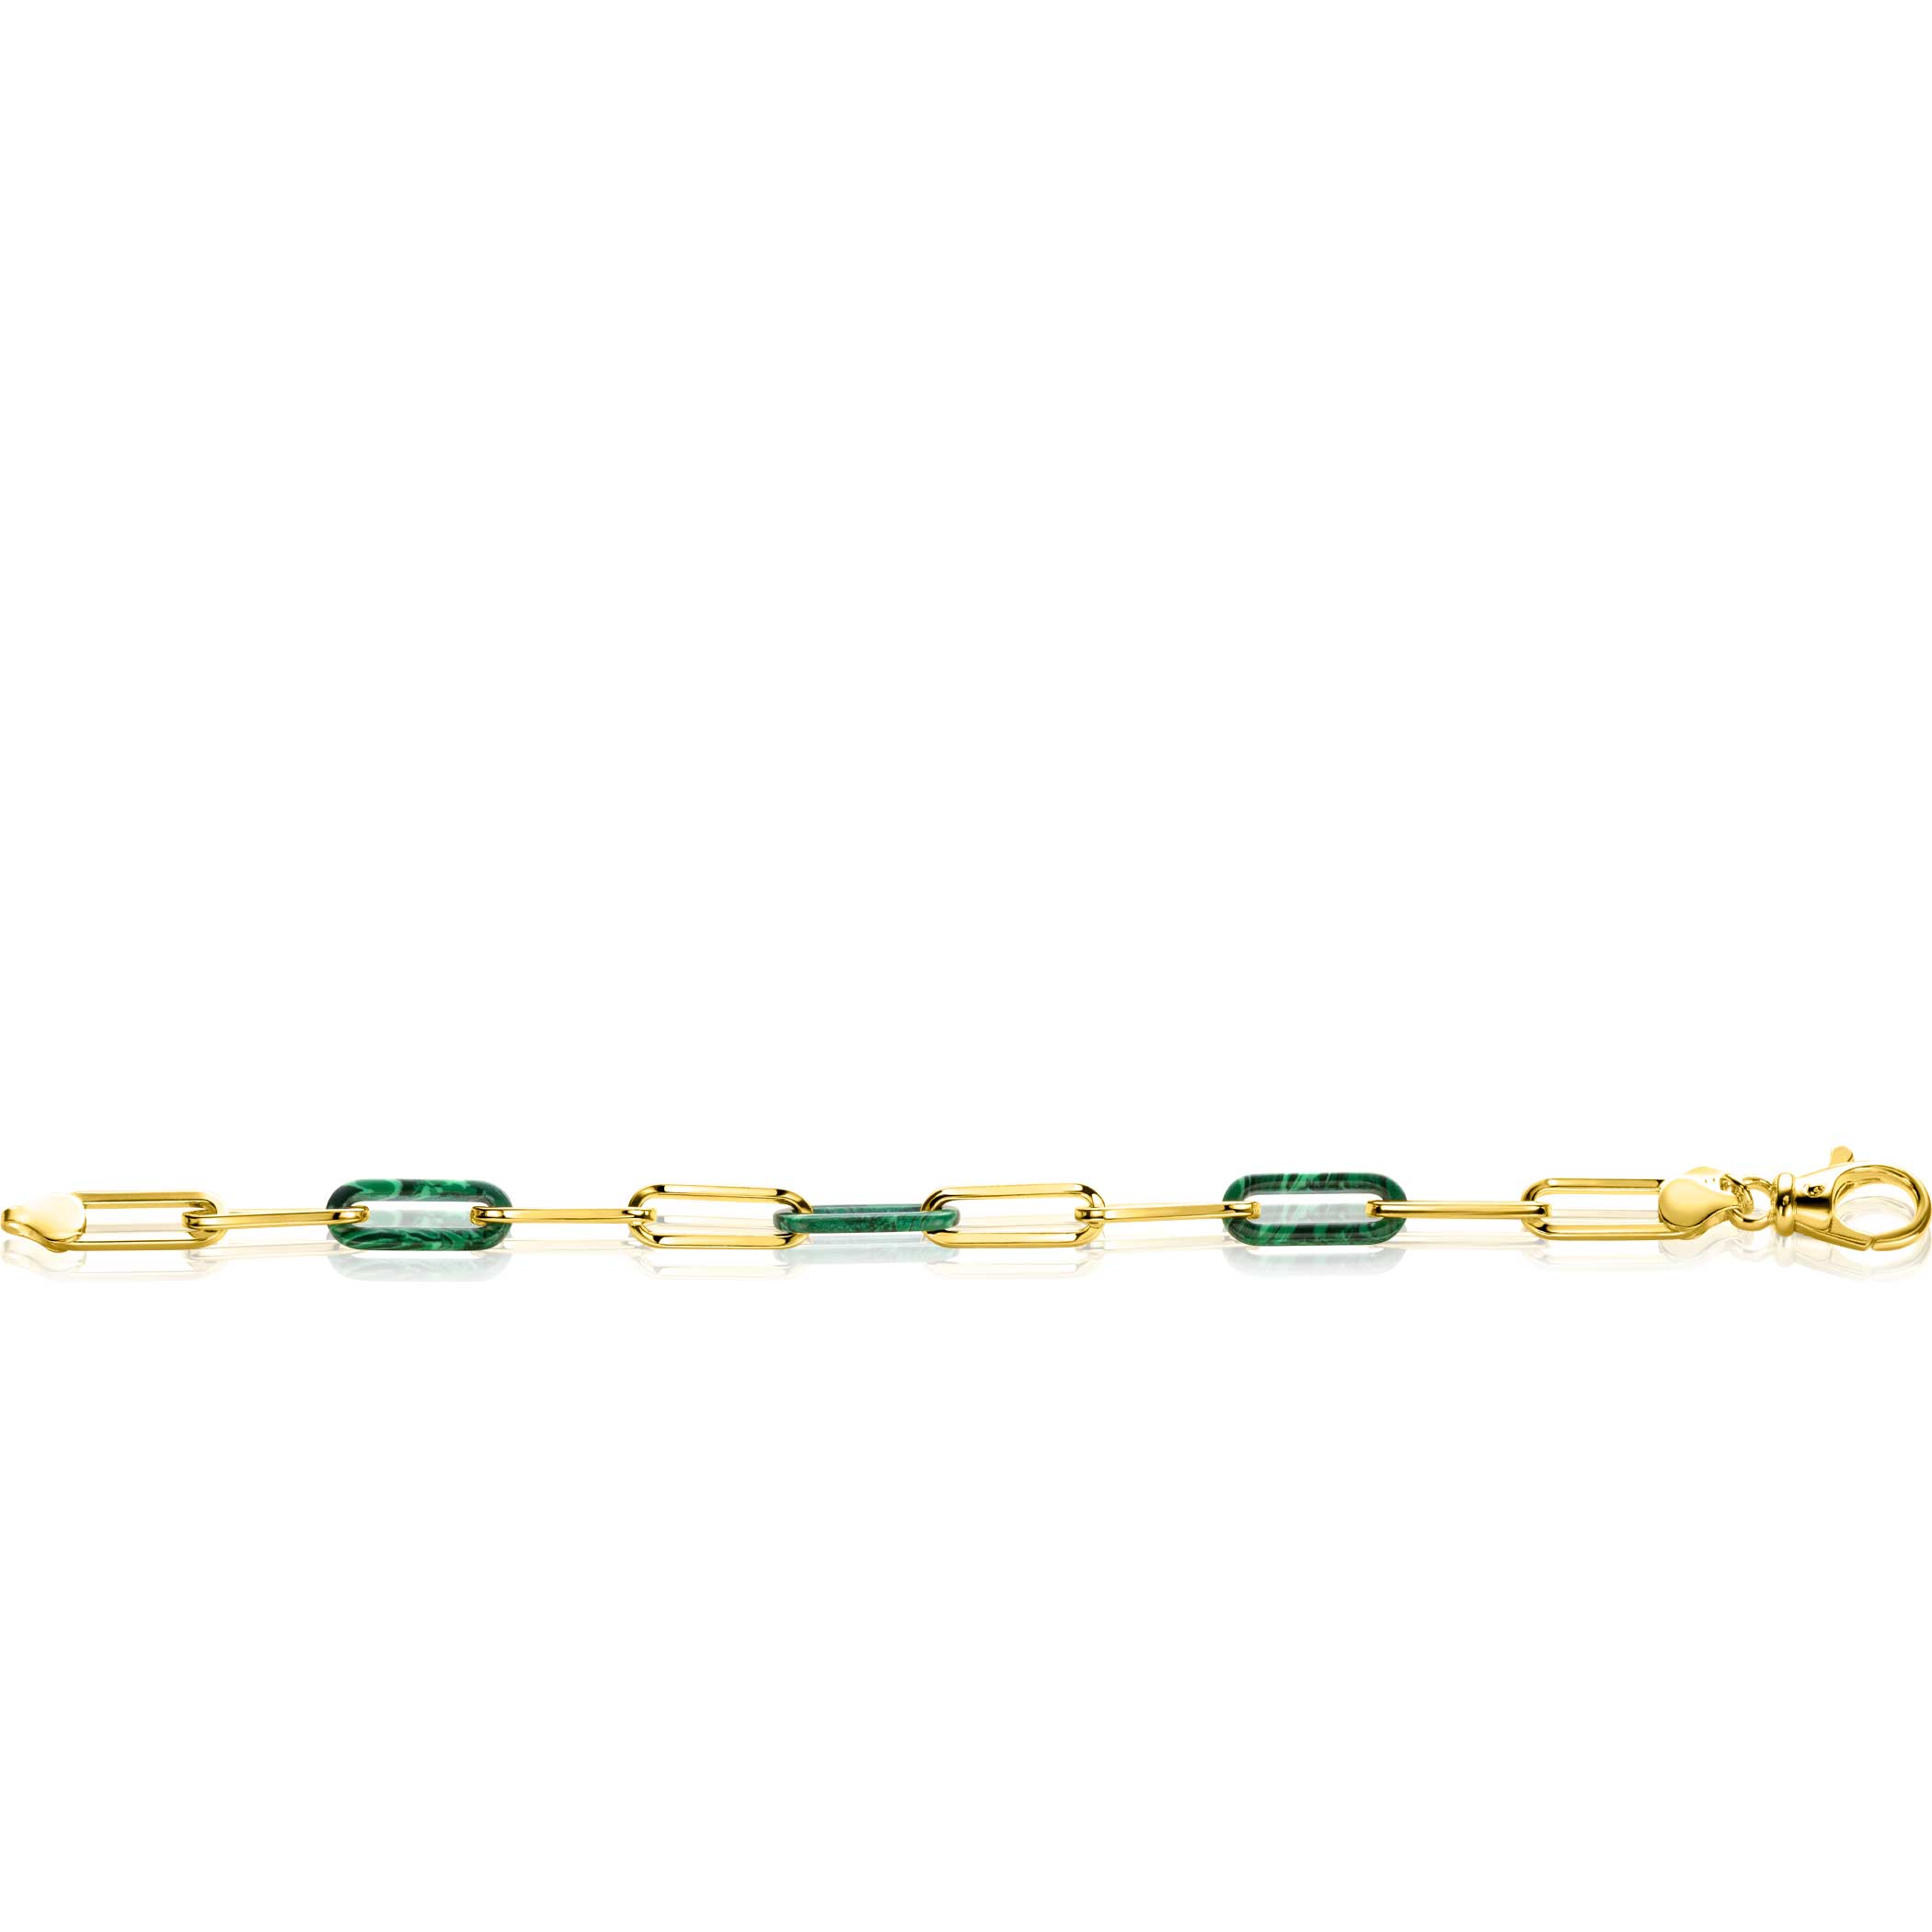 ZINZI Gold Plated Sterling Silver Bracelet Paperclip Chain with 3 Trendy Chains in Malachite Green 19cm ZIA2548